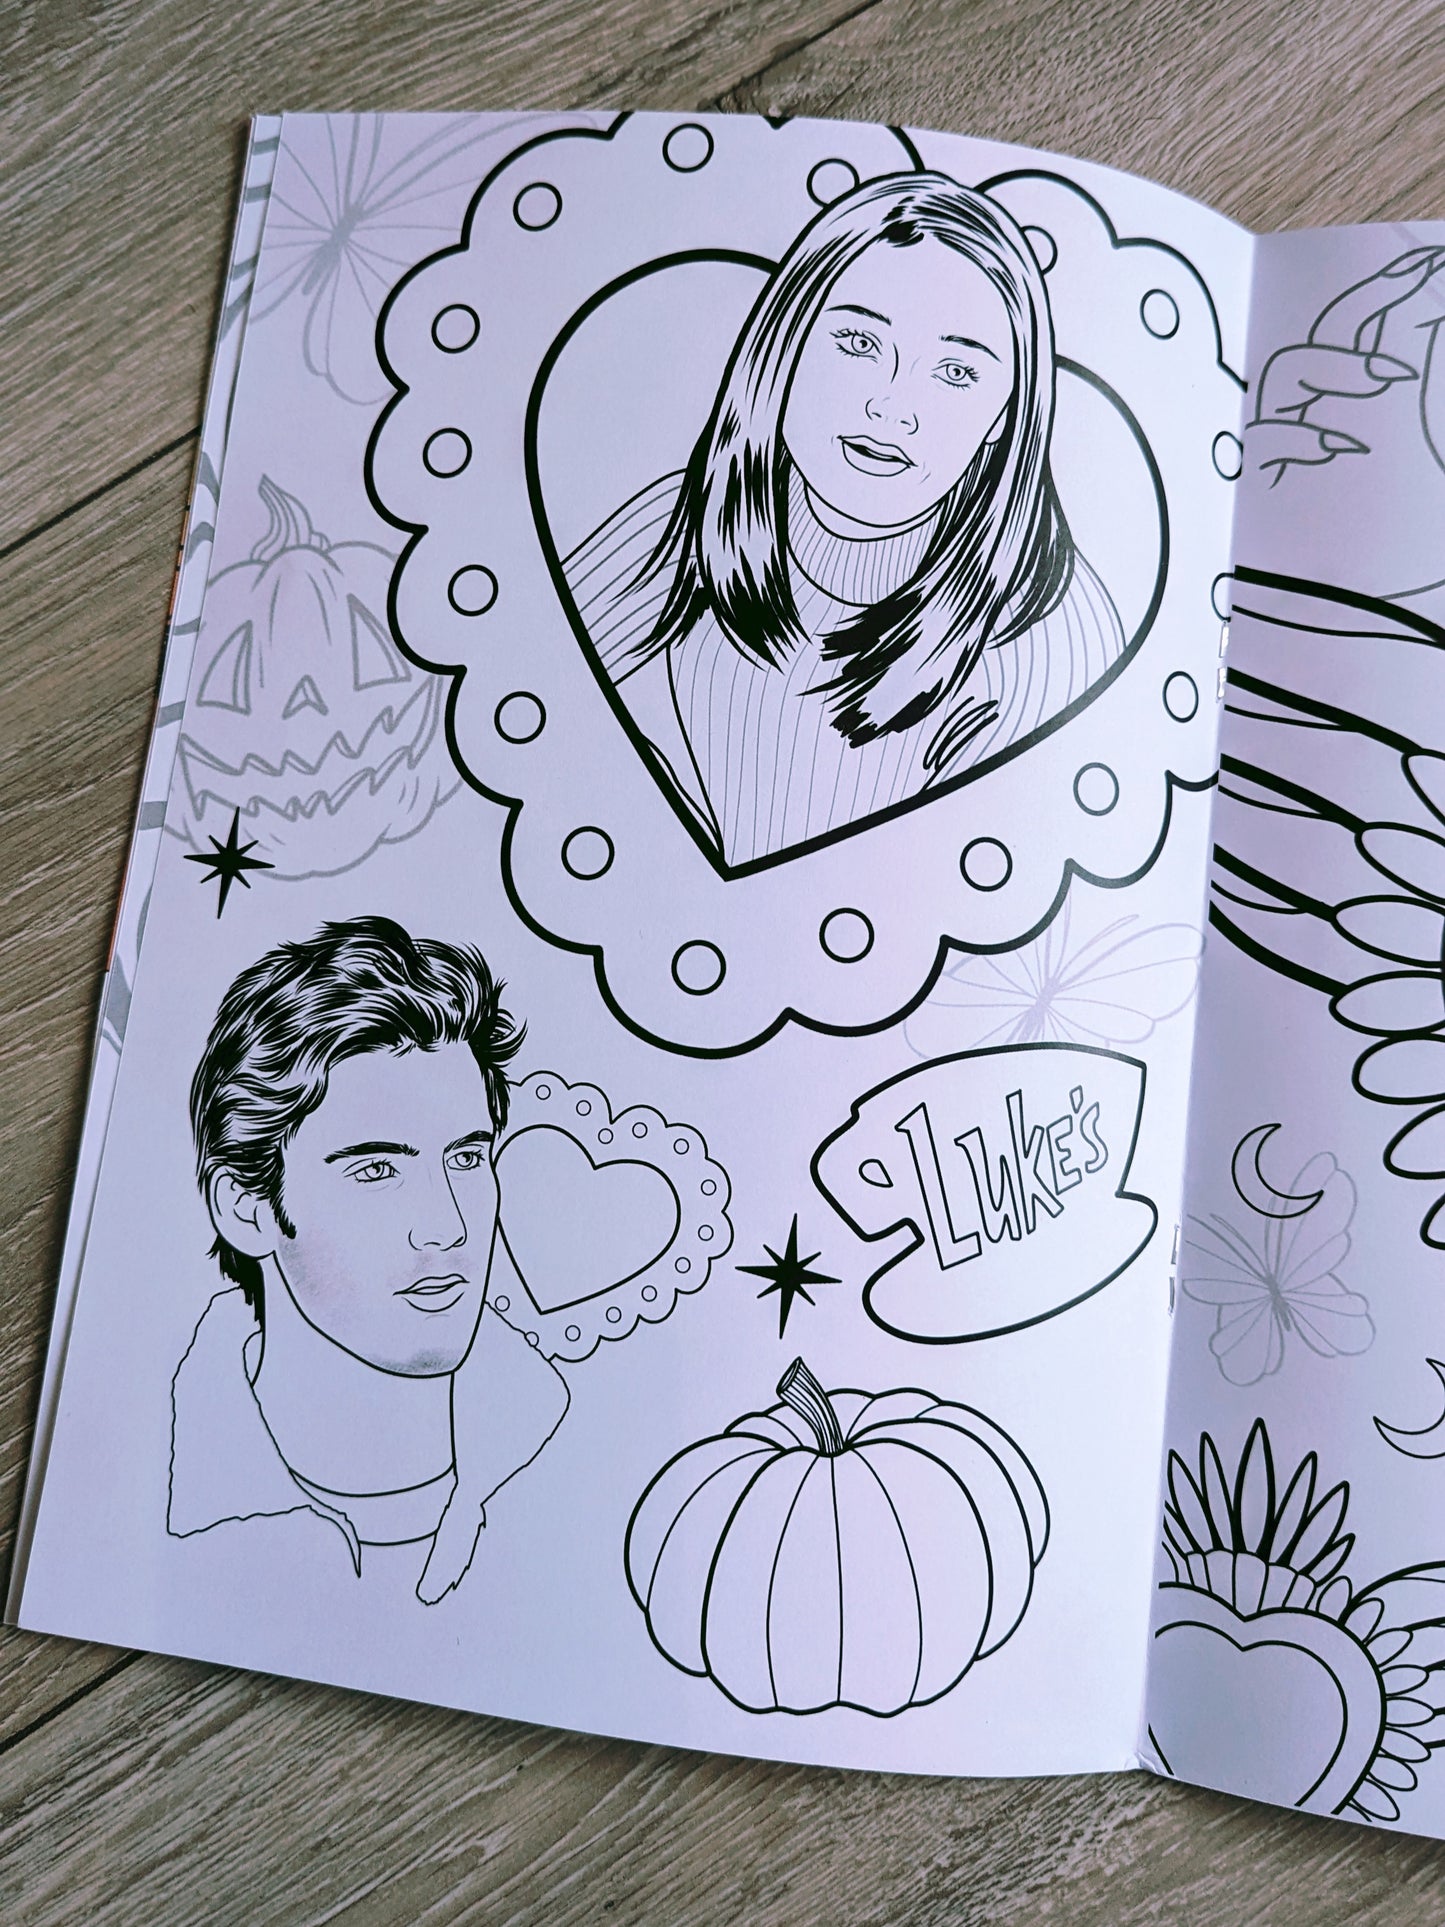 The Ultimate Halloween Colouring Book